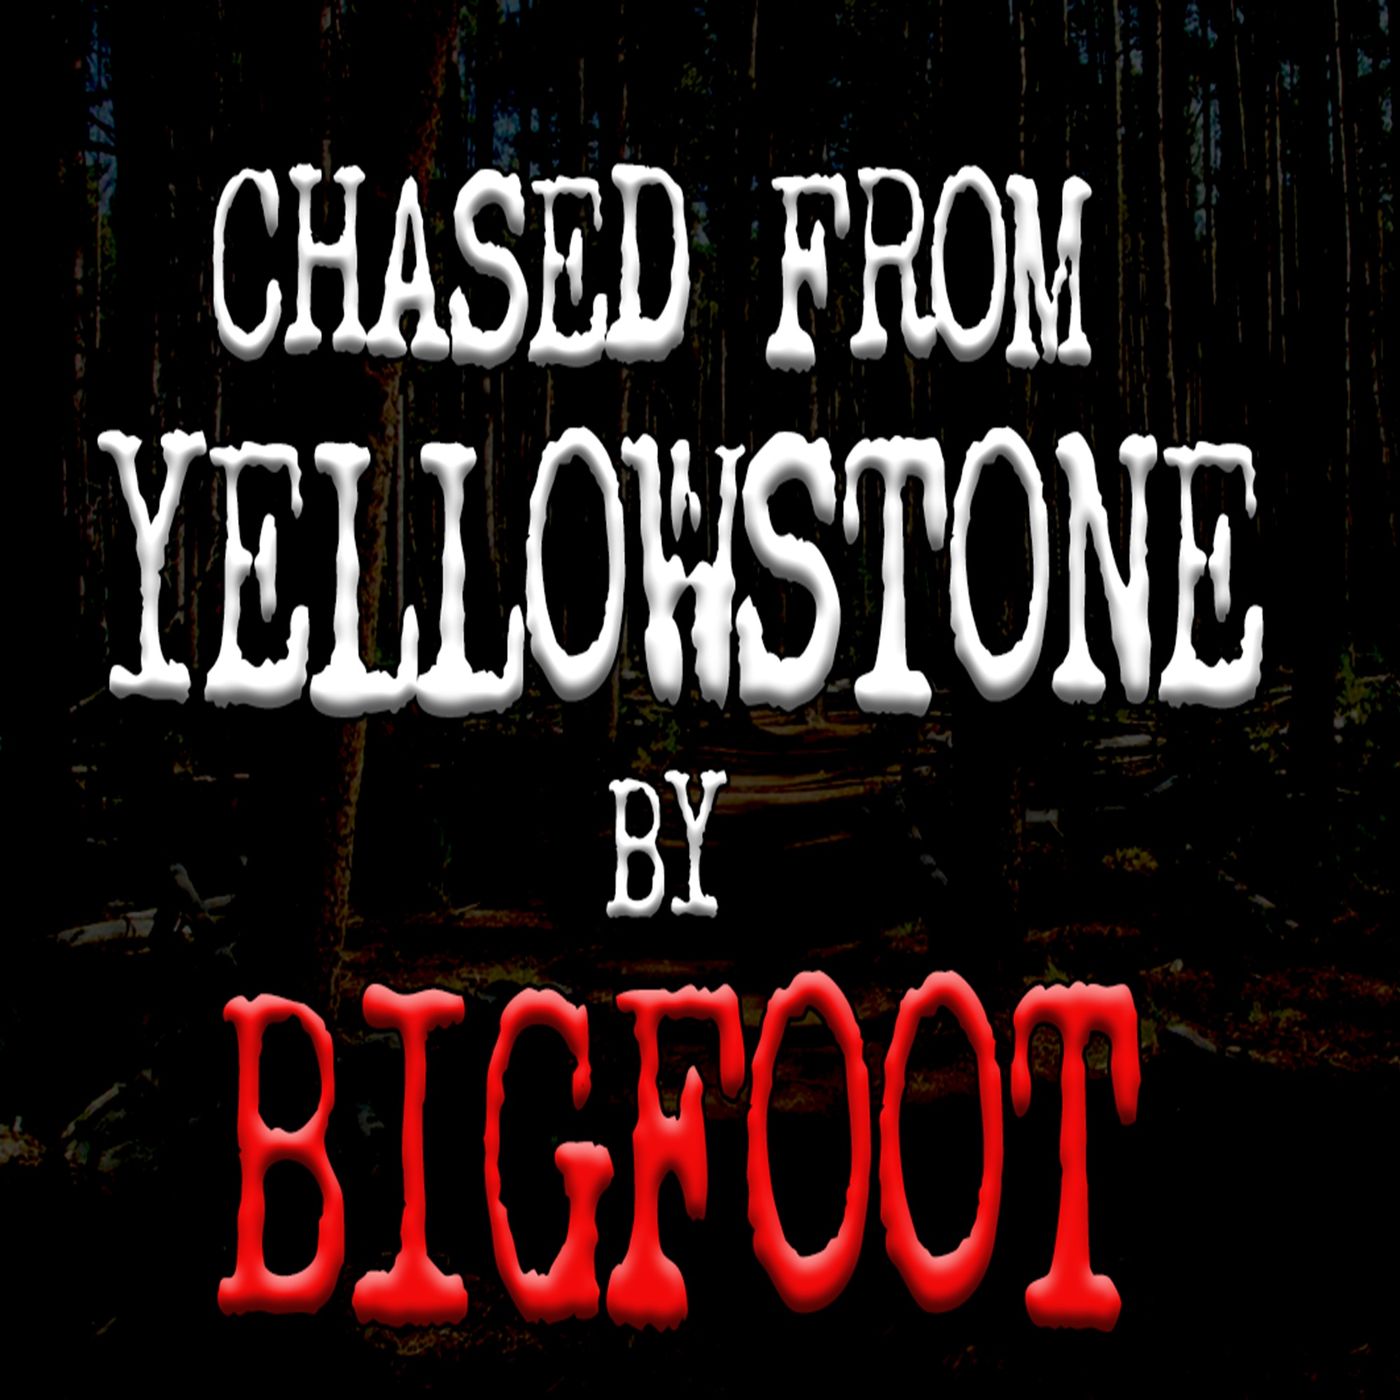 Bigfoot Chases Family from Yellowstone